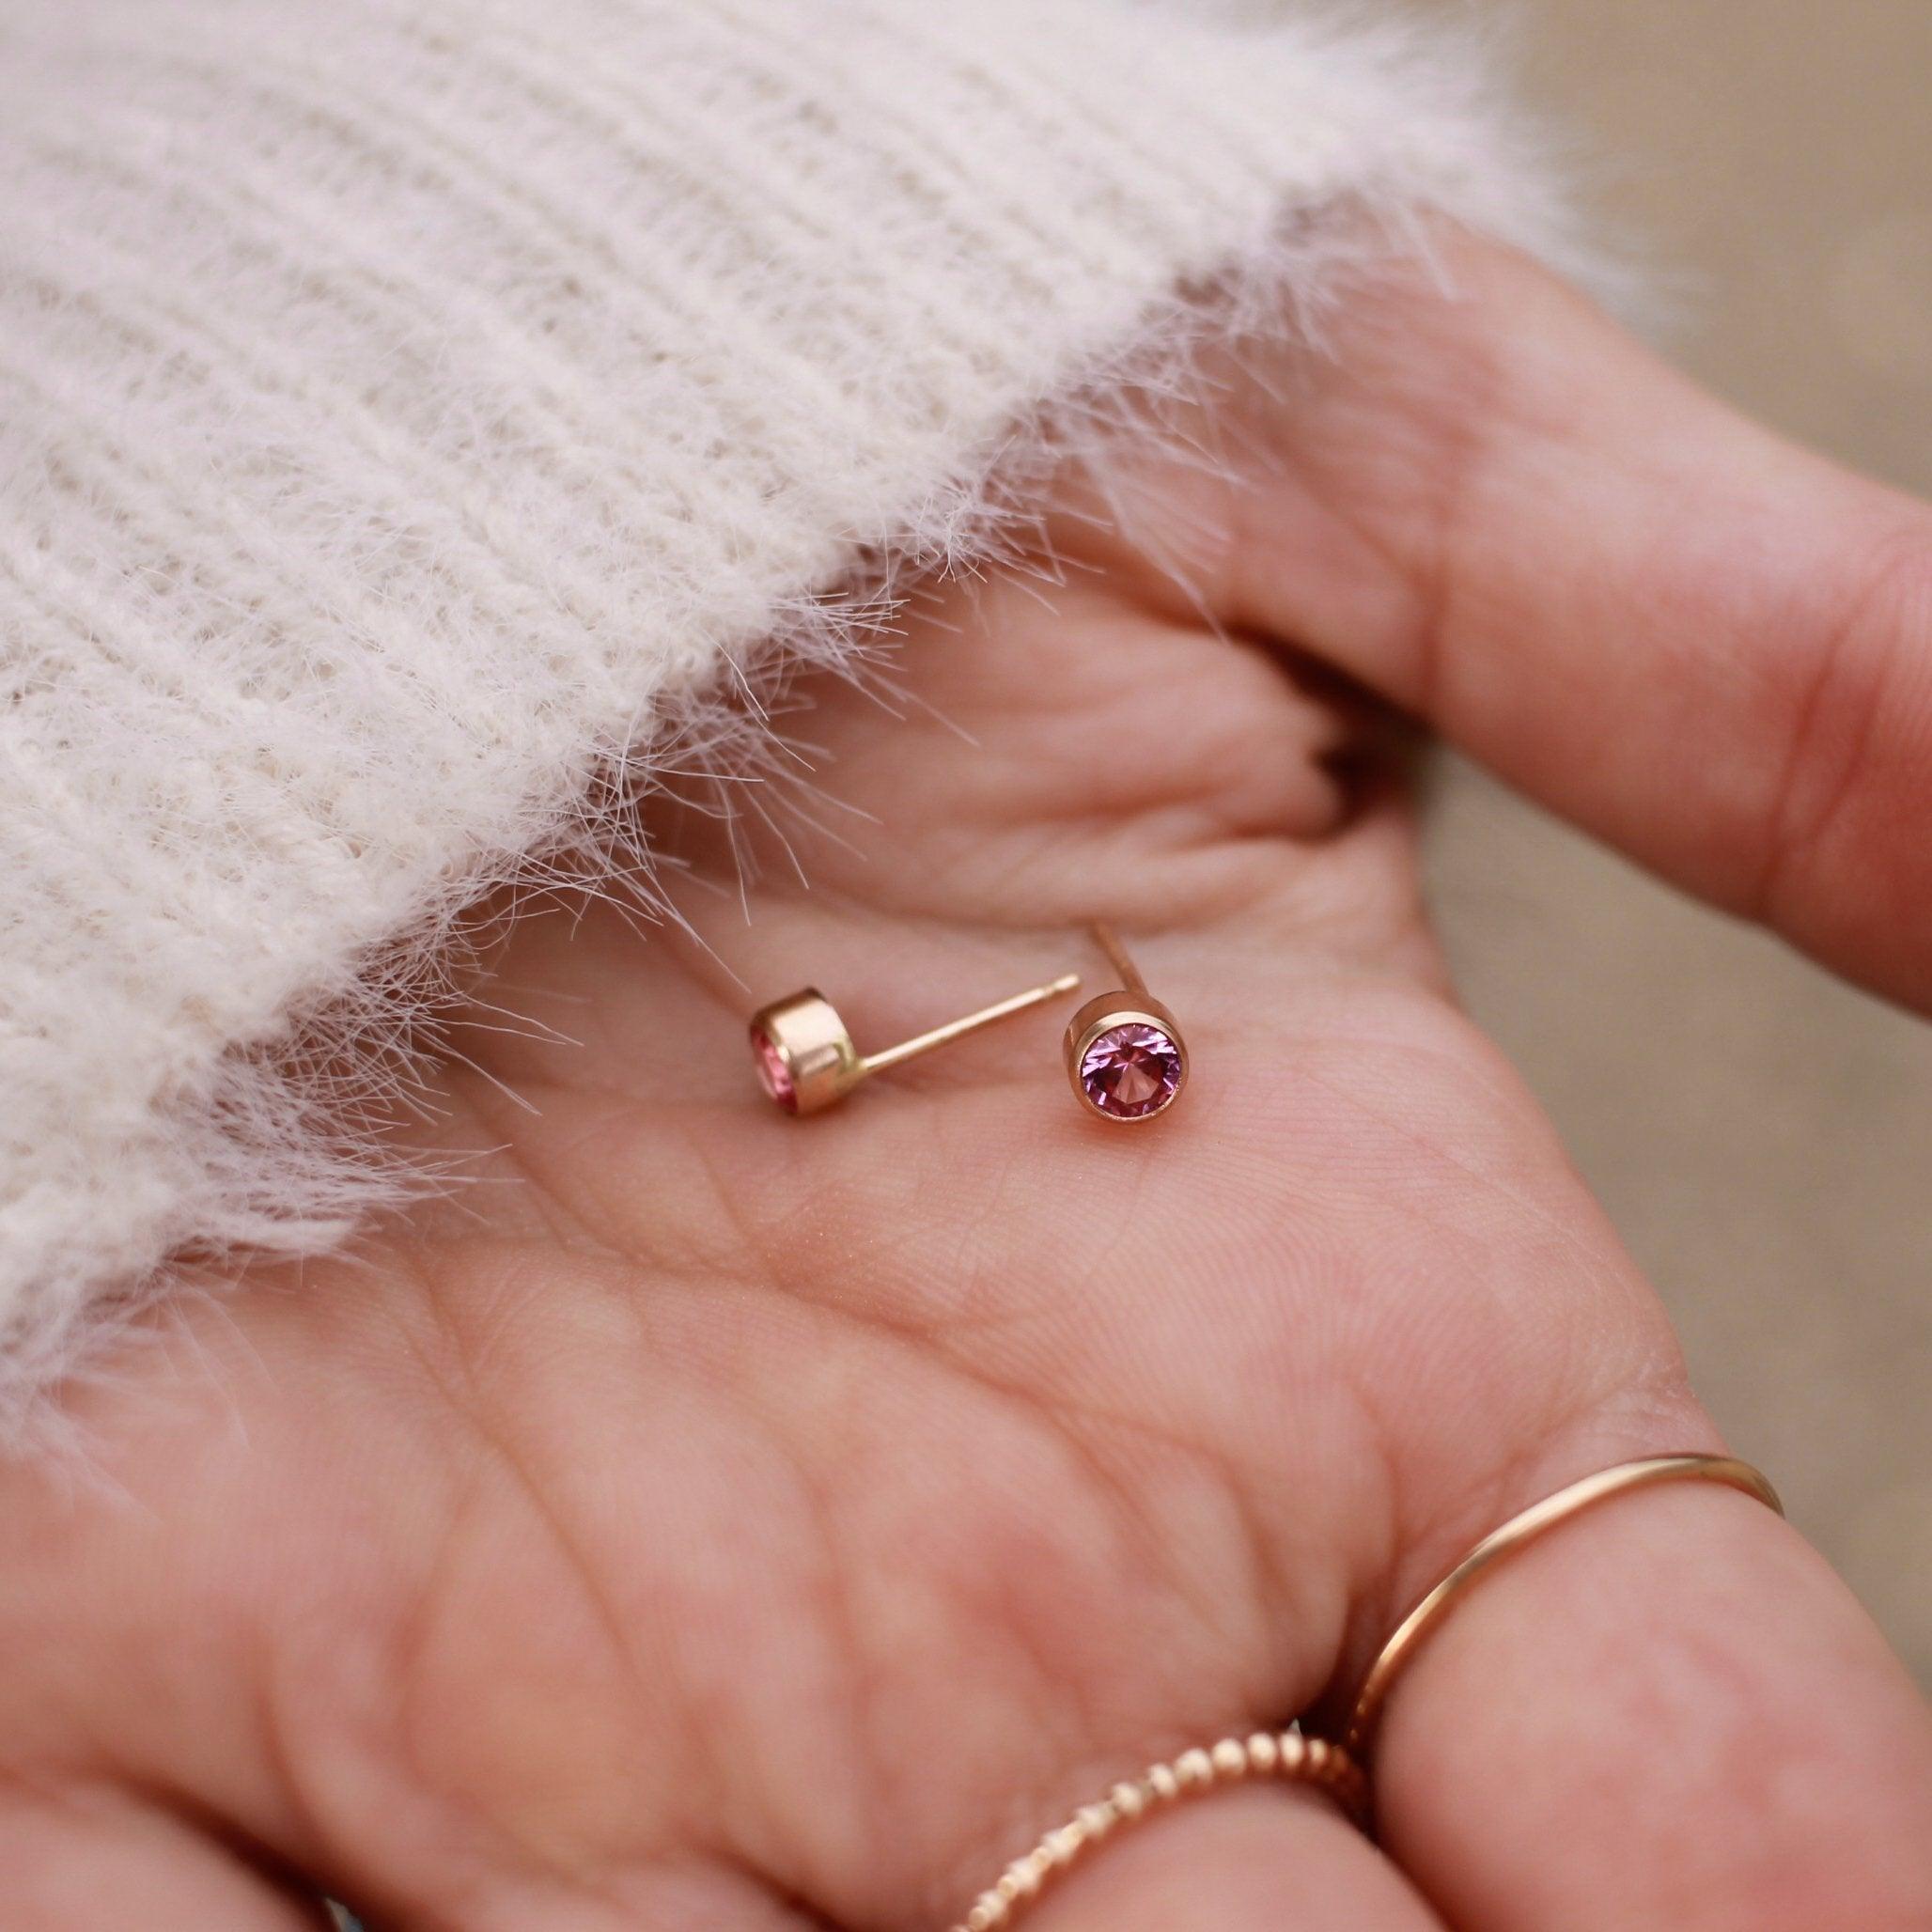 Birthstone Stud Earrings - Nolia Jewelry - Meaningful + Sustainably Handcrafted Jewelry